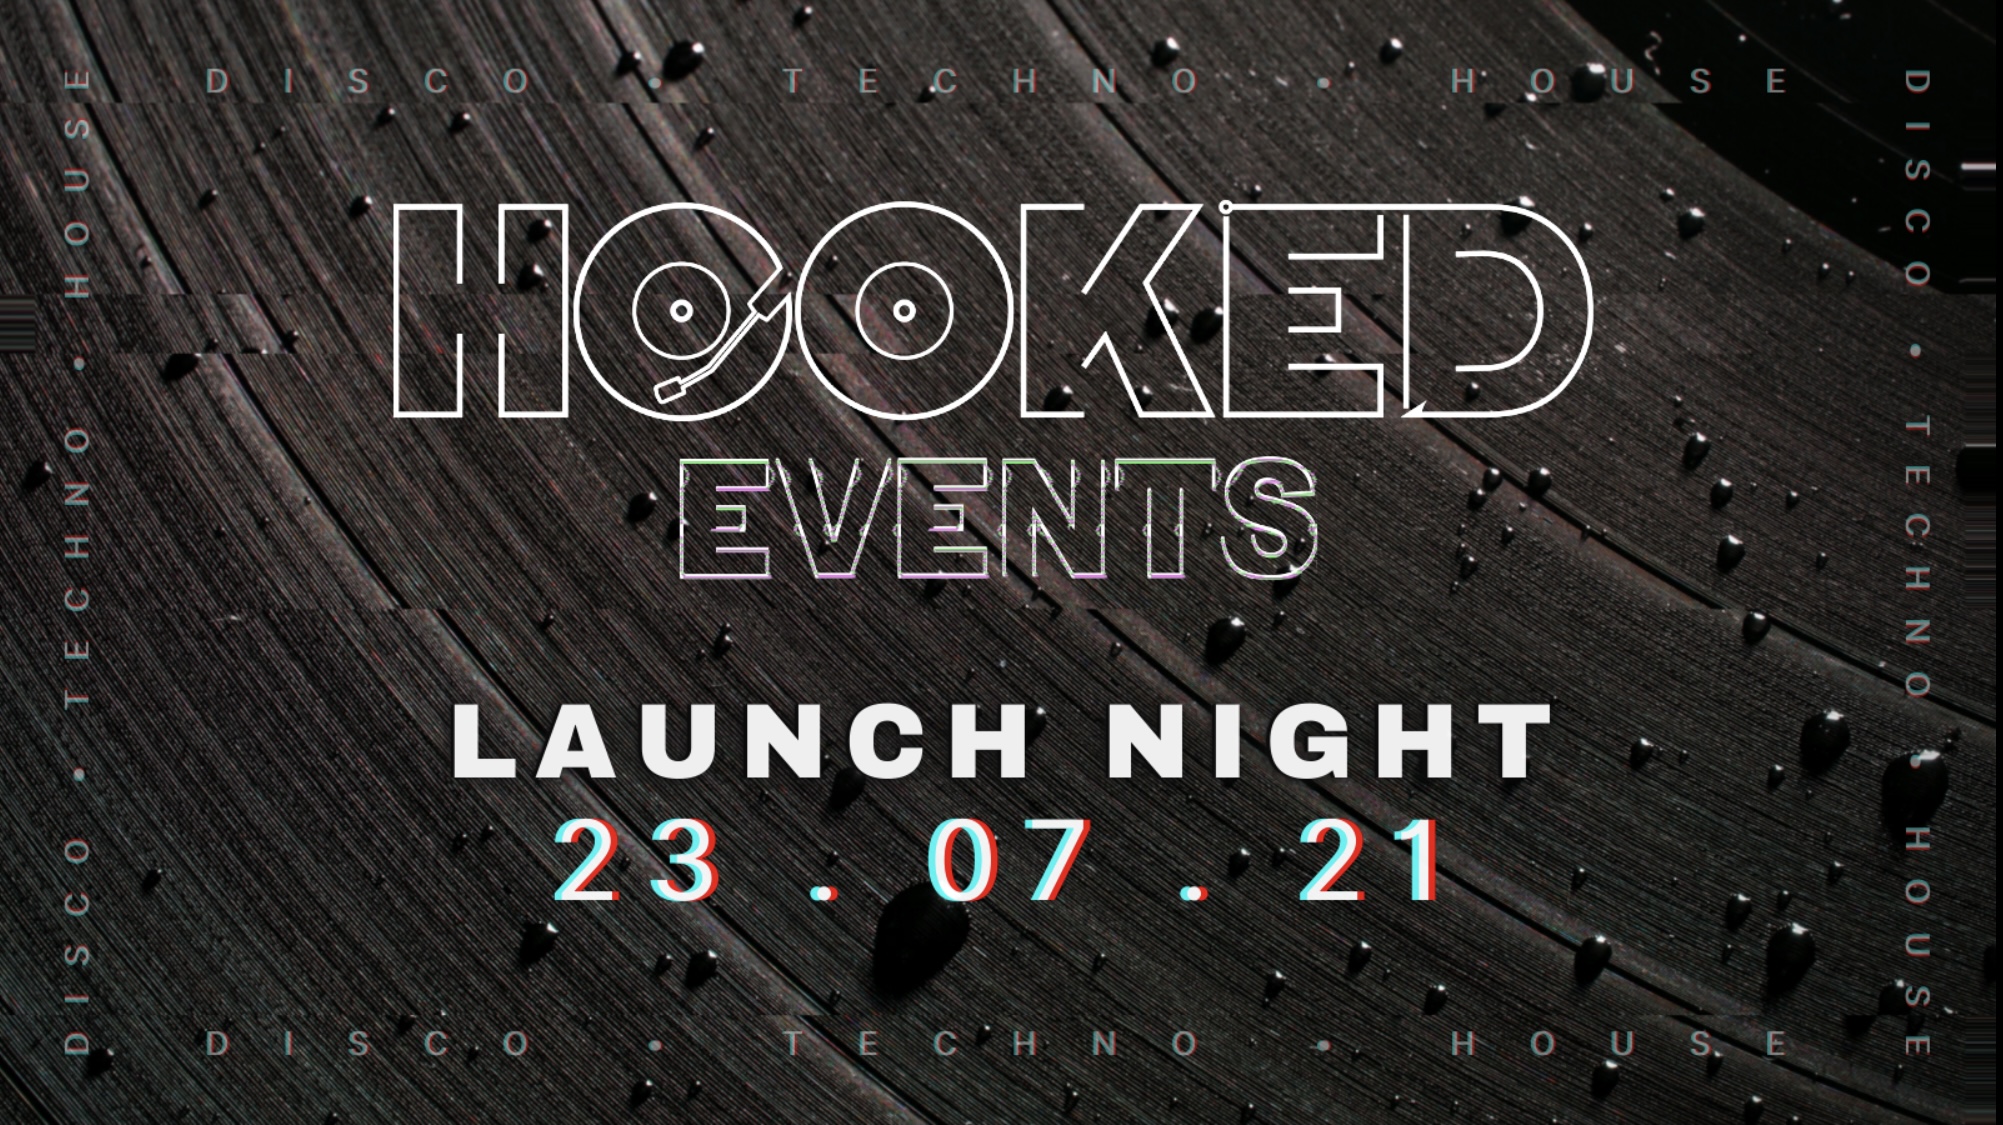 Hooked Launch Event Norwich 23rd July Disco Techno House At Fetch Norwich On 23rd Jul 21 Fatsoma